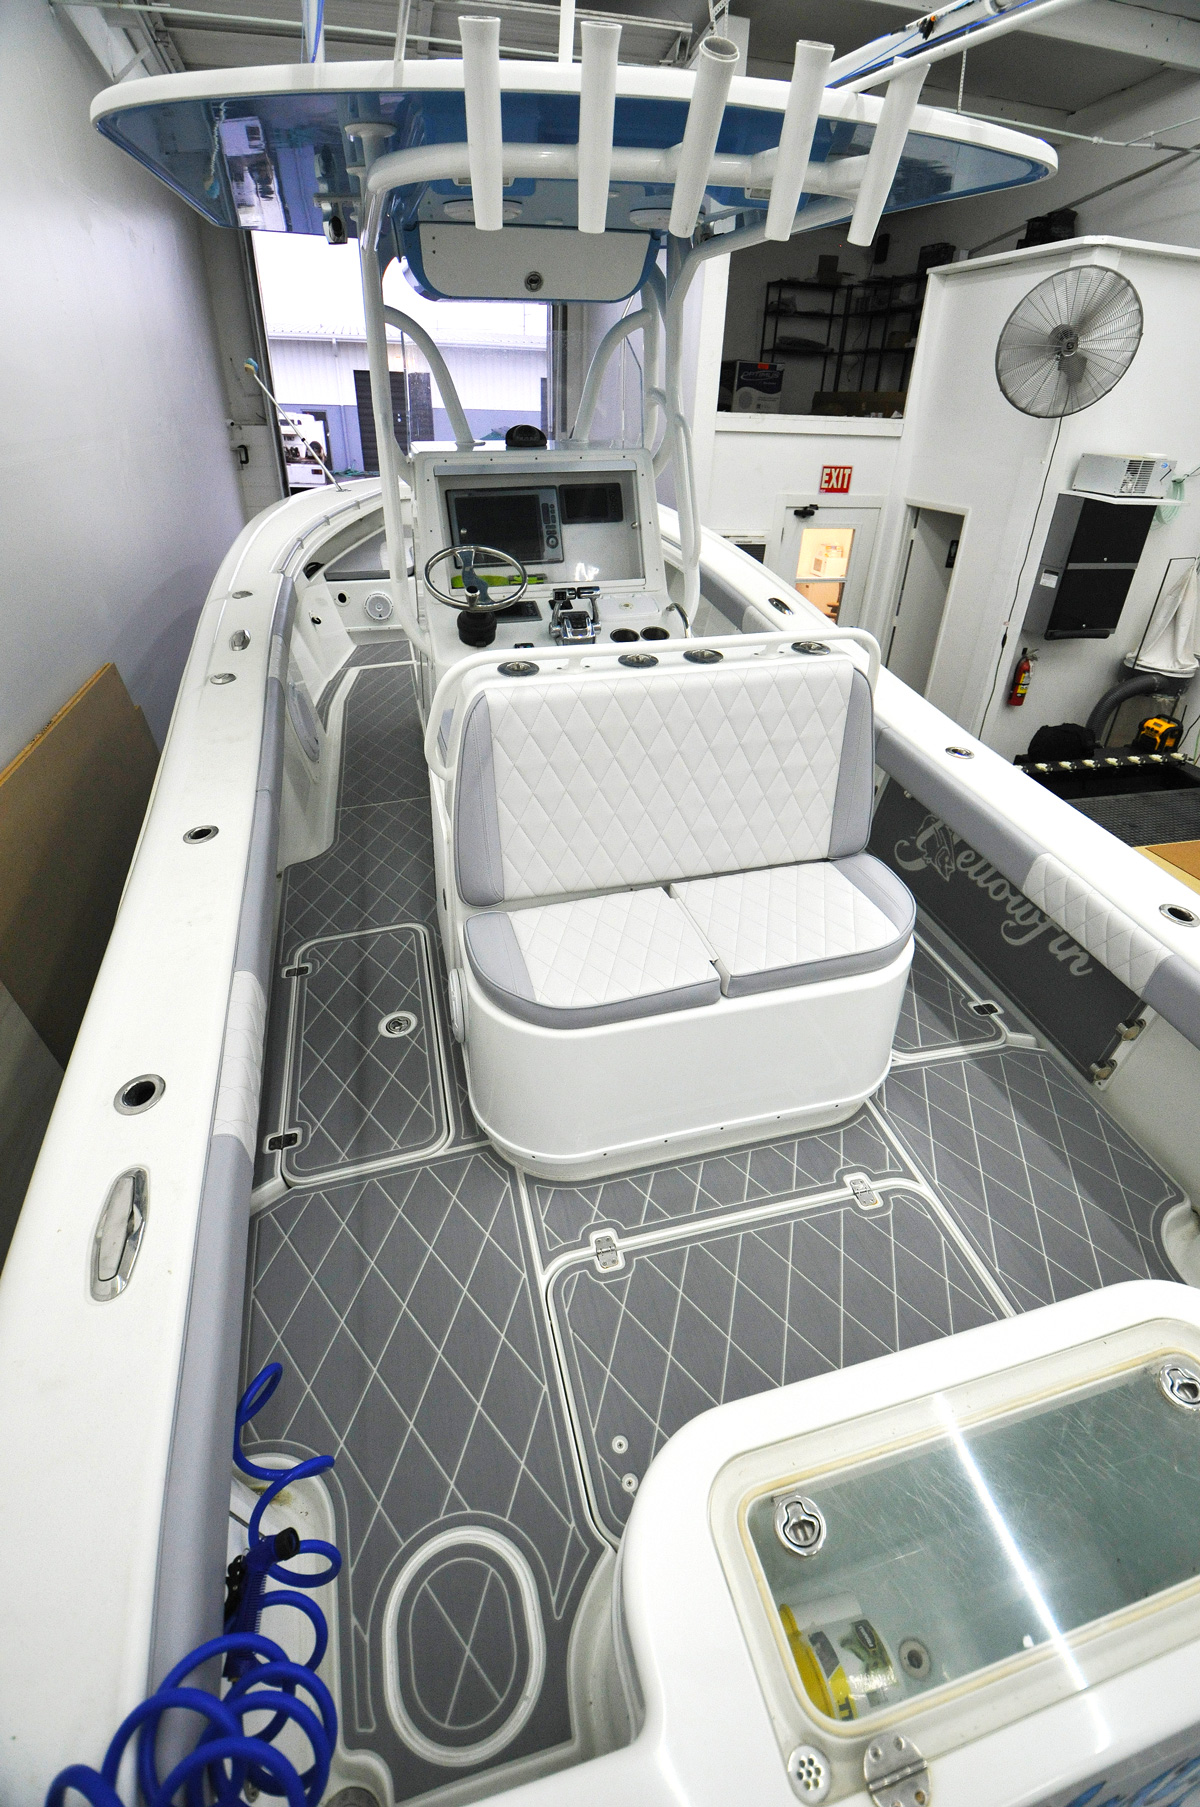 https://floridamarinecustoms.com/wp-content/uploads/2021/02/Yellowfin-Upholstery-Rear-view-of-Full-boat-with-roof.jpg